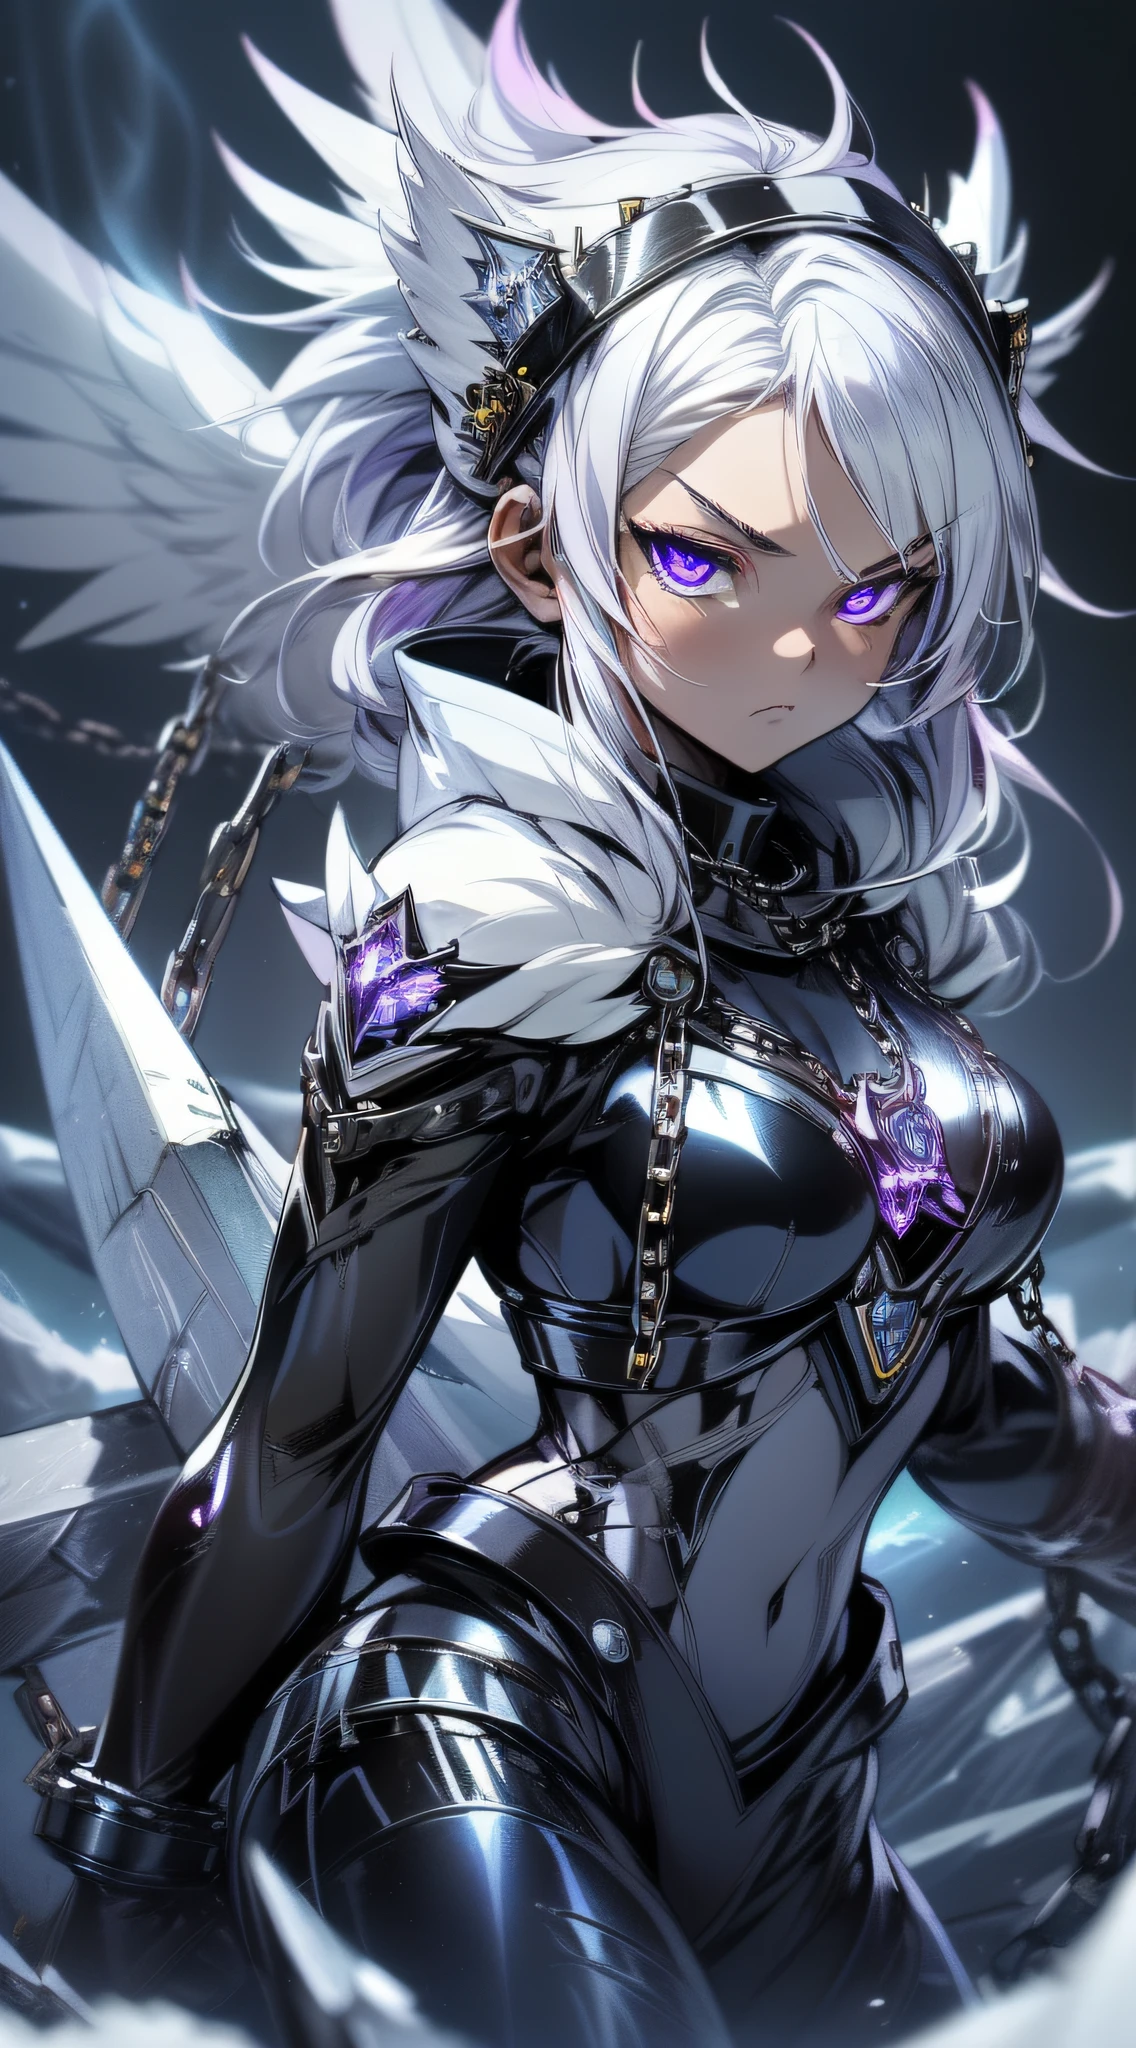 top-quality、Top image quality、​masterpiece、girl with((black shiny mechanic suit、18year old、teen ager、cute little、Best Bust、big bast,Beautiful shining purple eyes、Breasts wide open, white  hair、one white winged,Longhaire、A slender,Large valleys、belligerent movements,sharp claws、anchor chain、chain、chains、Beam Cannon、Have an ice sword、)),hiquality、Beautiful Art、Background with((natta、snow blowing、Oyuki、Yuki、ice tower、big ice house、White smoke)))、,masutepiece、depth of fields,Cinematic style